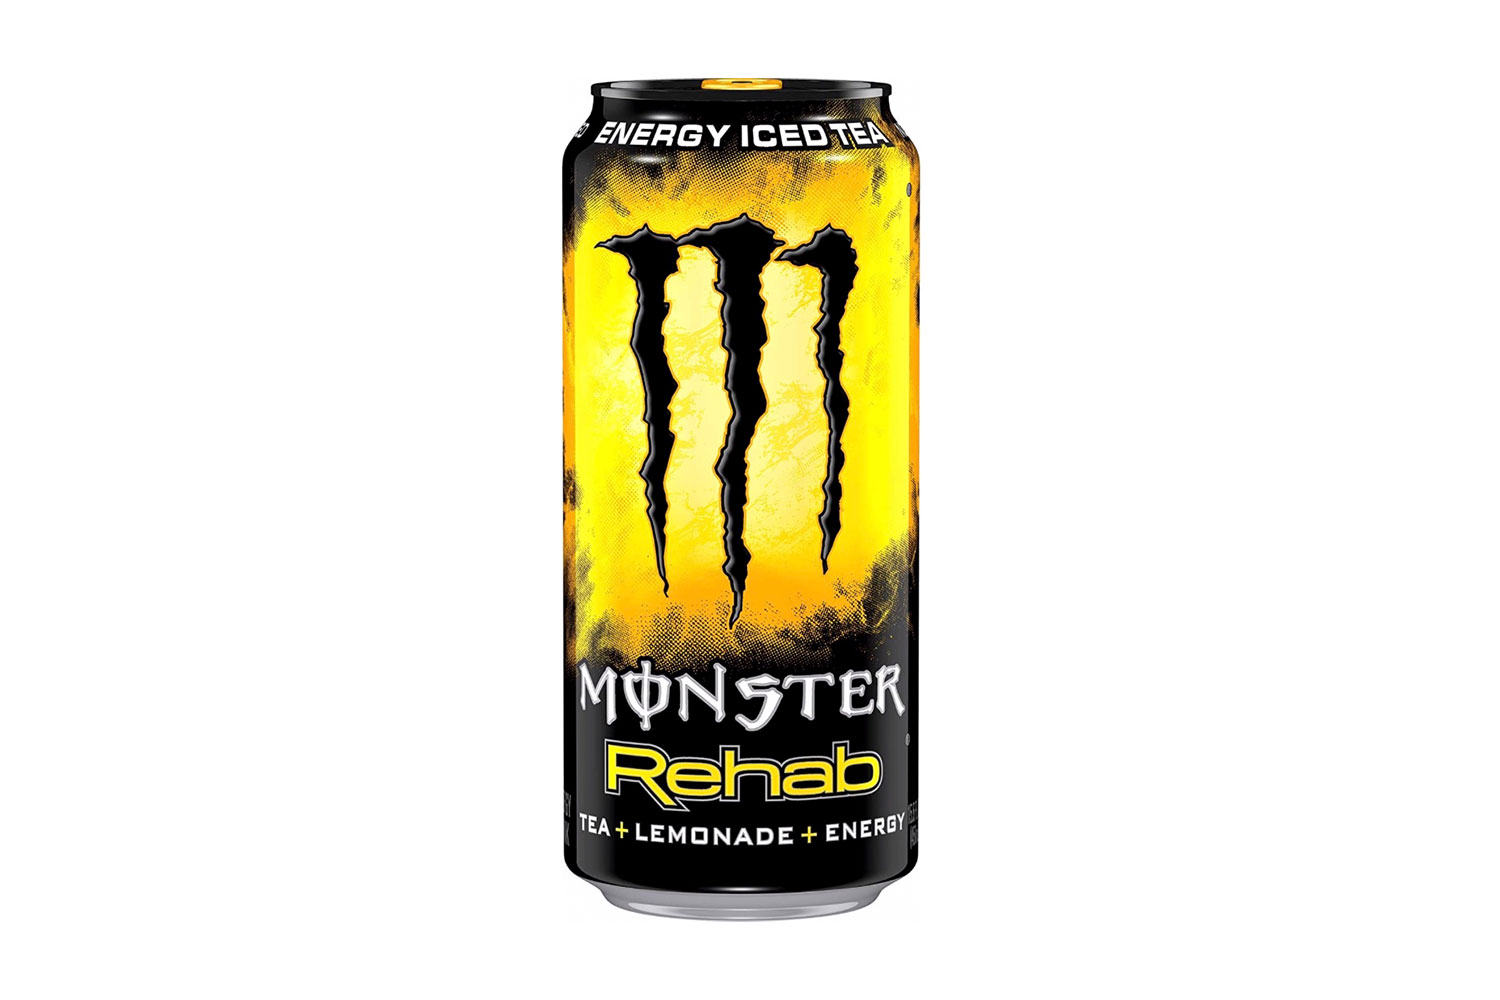 The 10 Best Energy Drinks to Buy 2022 - Manual